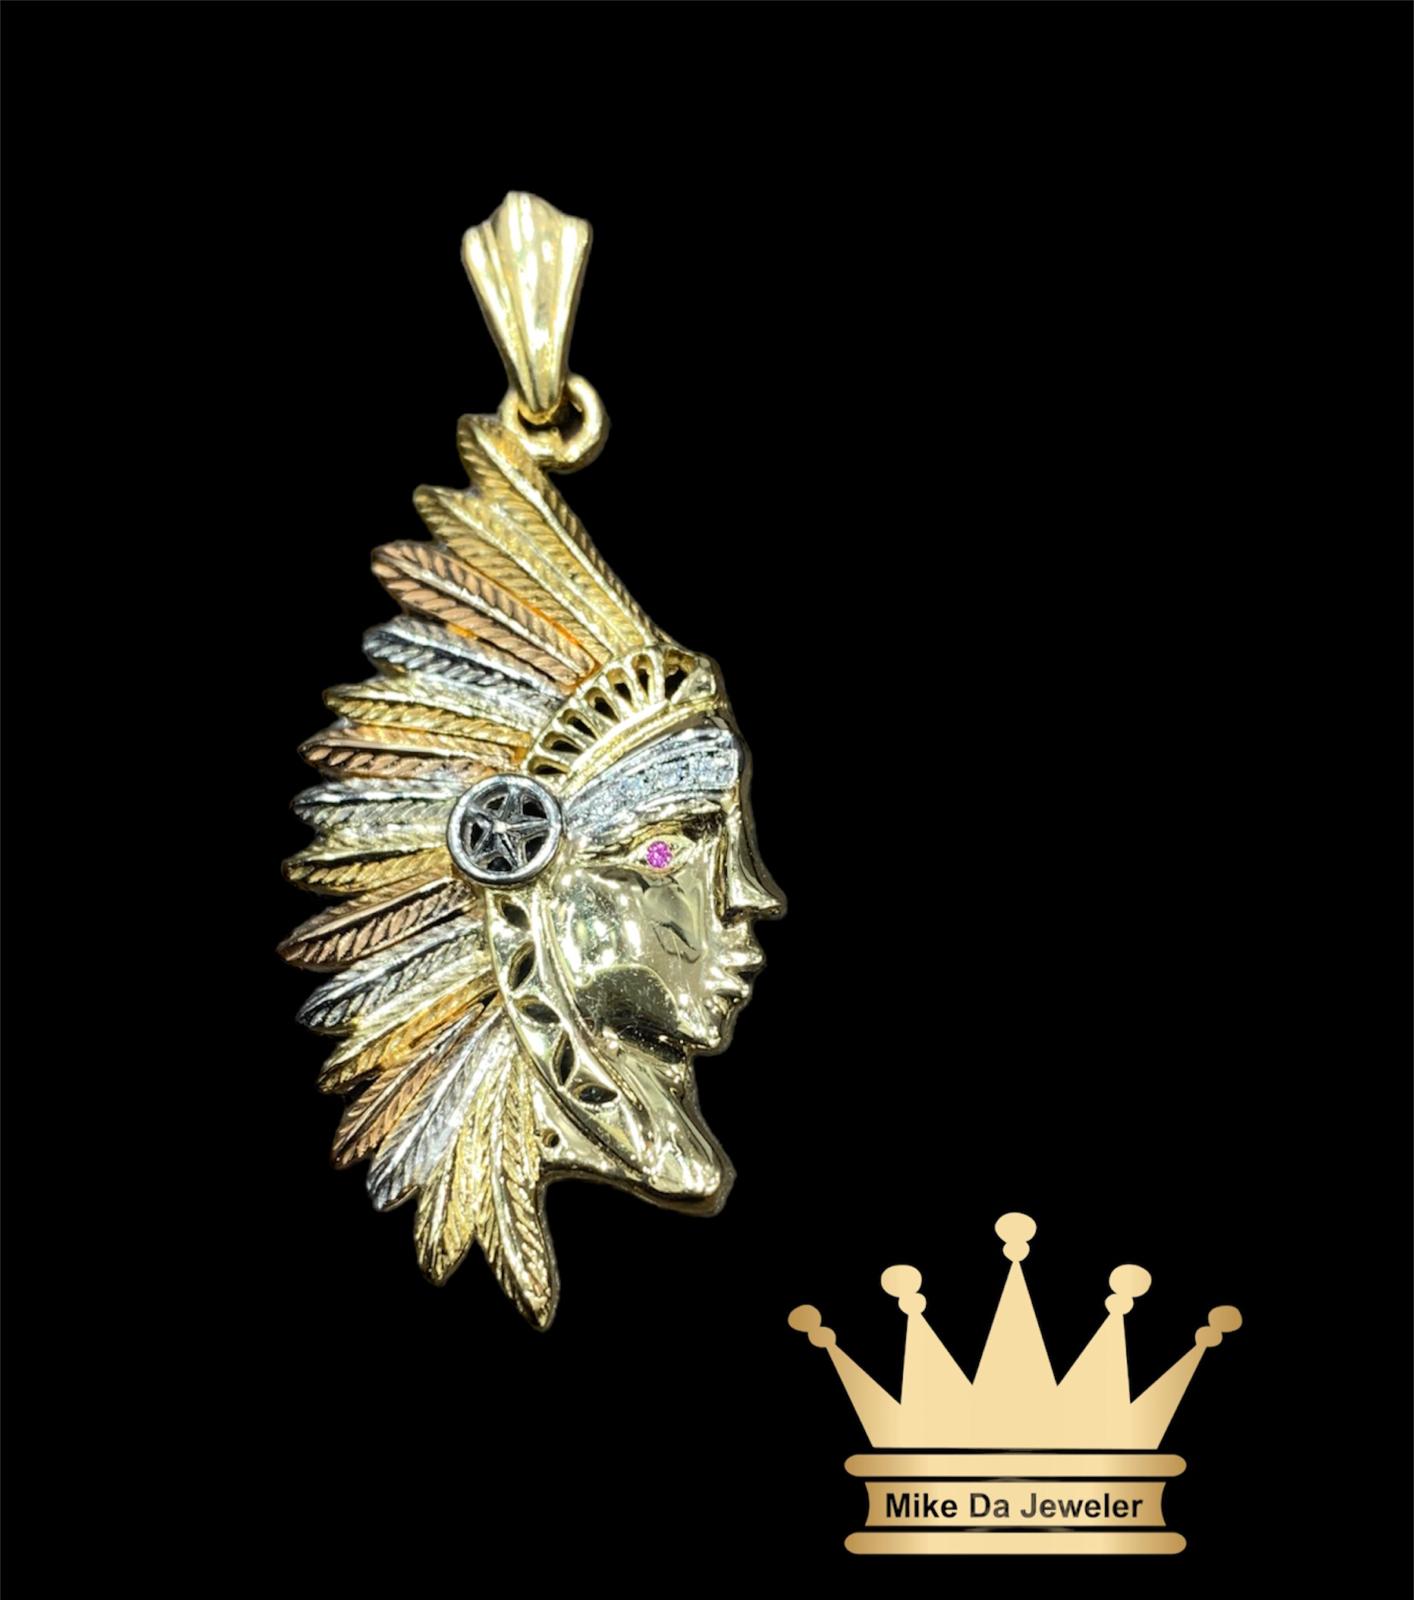 18k solid tricolor handmade Native American pendant price $900 dollars weight 8.22 grams size 1.25 inches